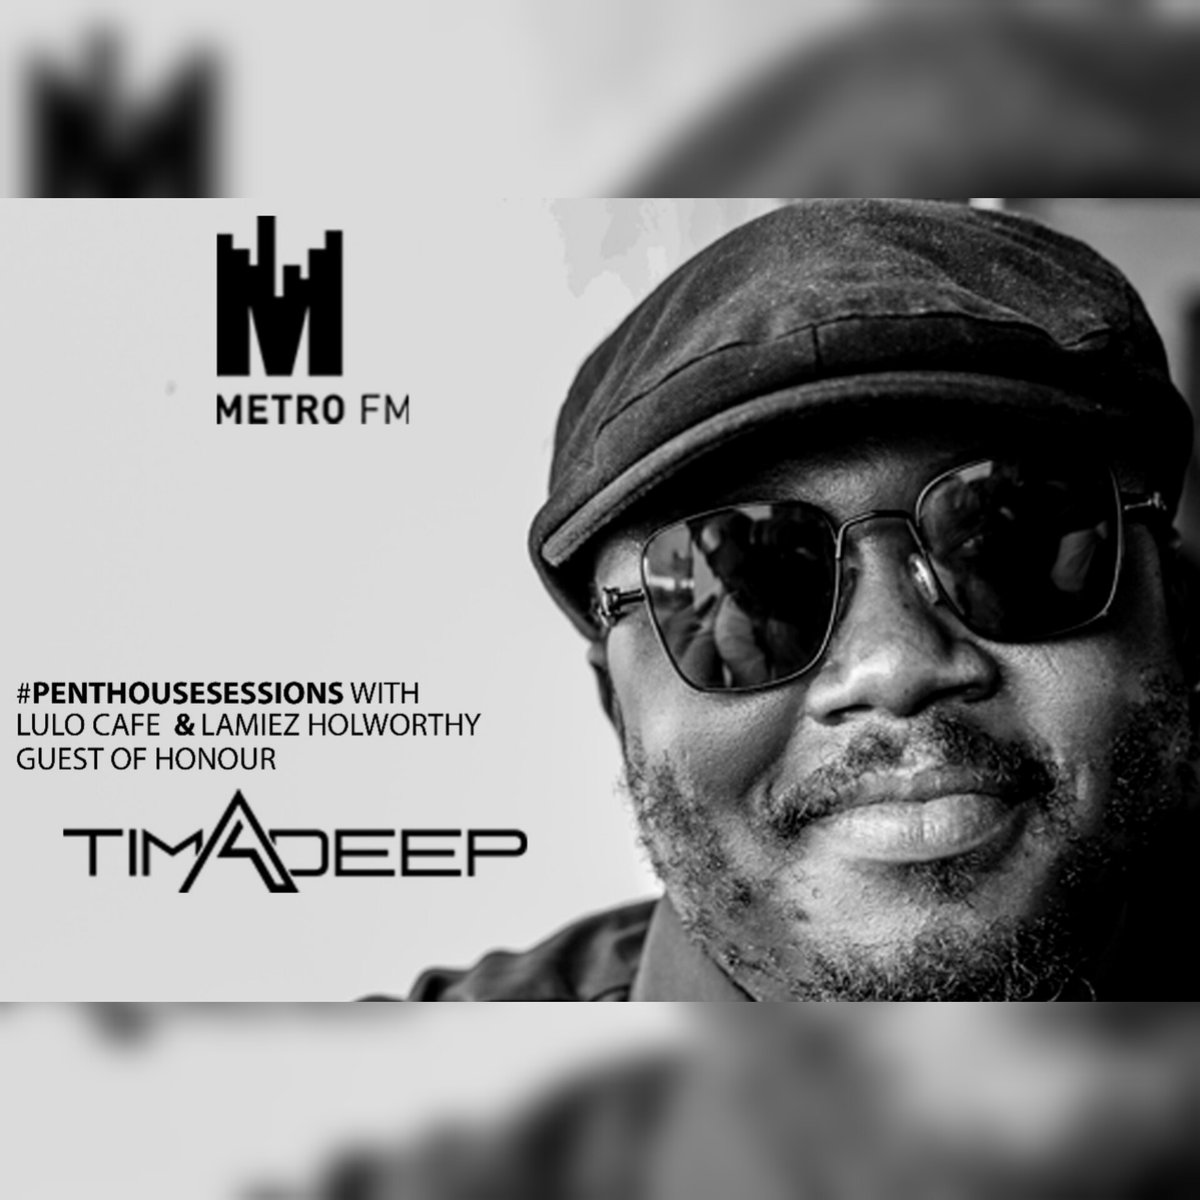 #PenthouseSessions on MetroFM #GuestOfHonour audiomack.com/timadeep/song/… 1.- Now Is Not Then 2.- I Will Carry U Home 3.- Sean (TimAdeep Novem Dub) 4.- Strong Again 5.- Neither One of Us 'Wants to Be the First to Say Goodbye' (TimAdeep RA Mix) 6.- Wale Watu (TimAdeep Urban Mix)